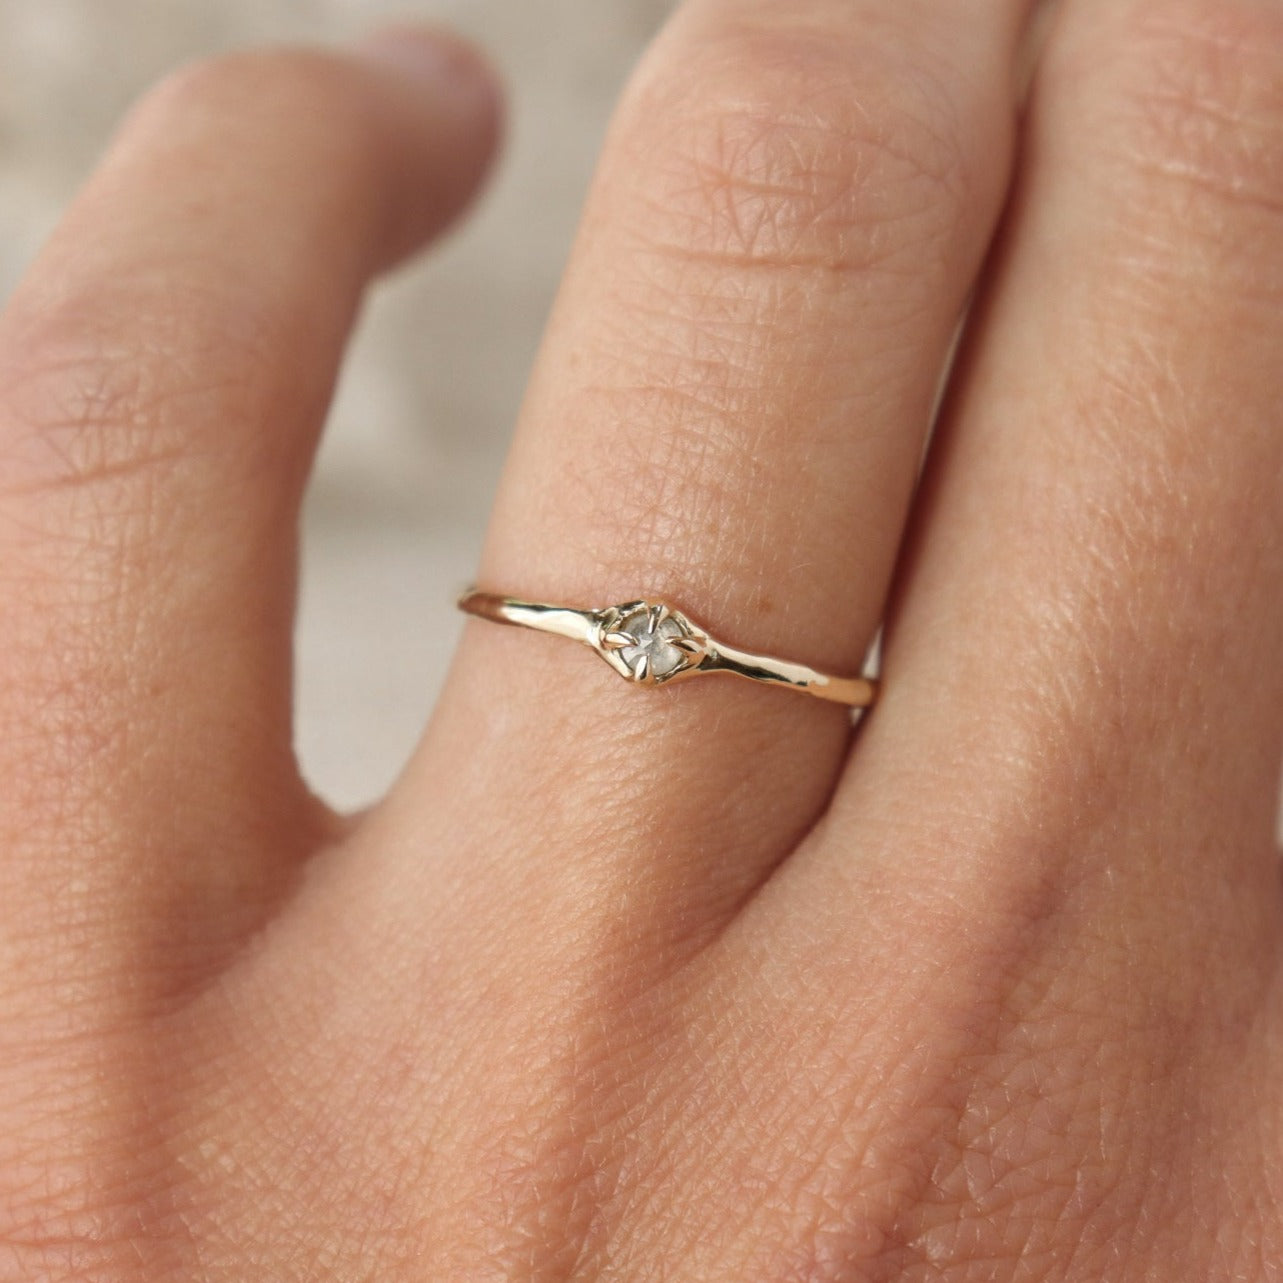 Tiny rose cut icy diamond is set with prongs on a narrow 14k gold band.